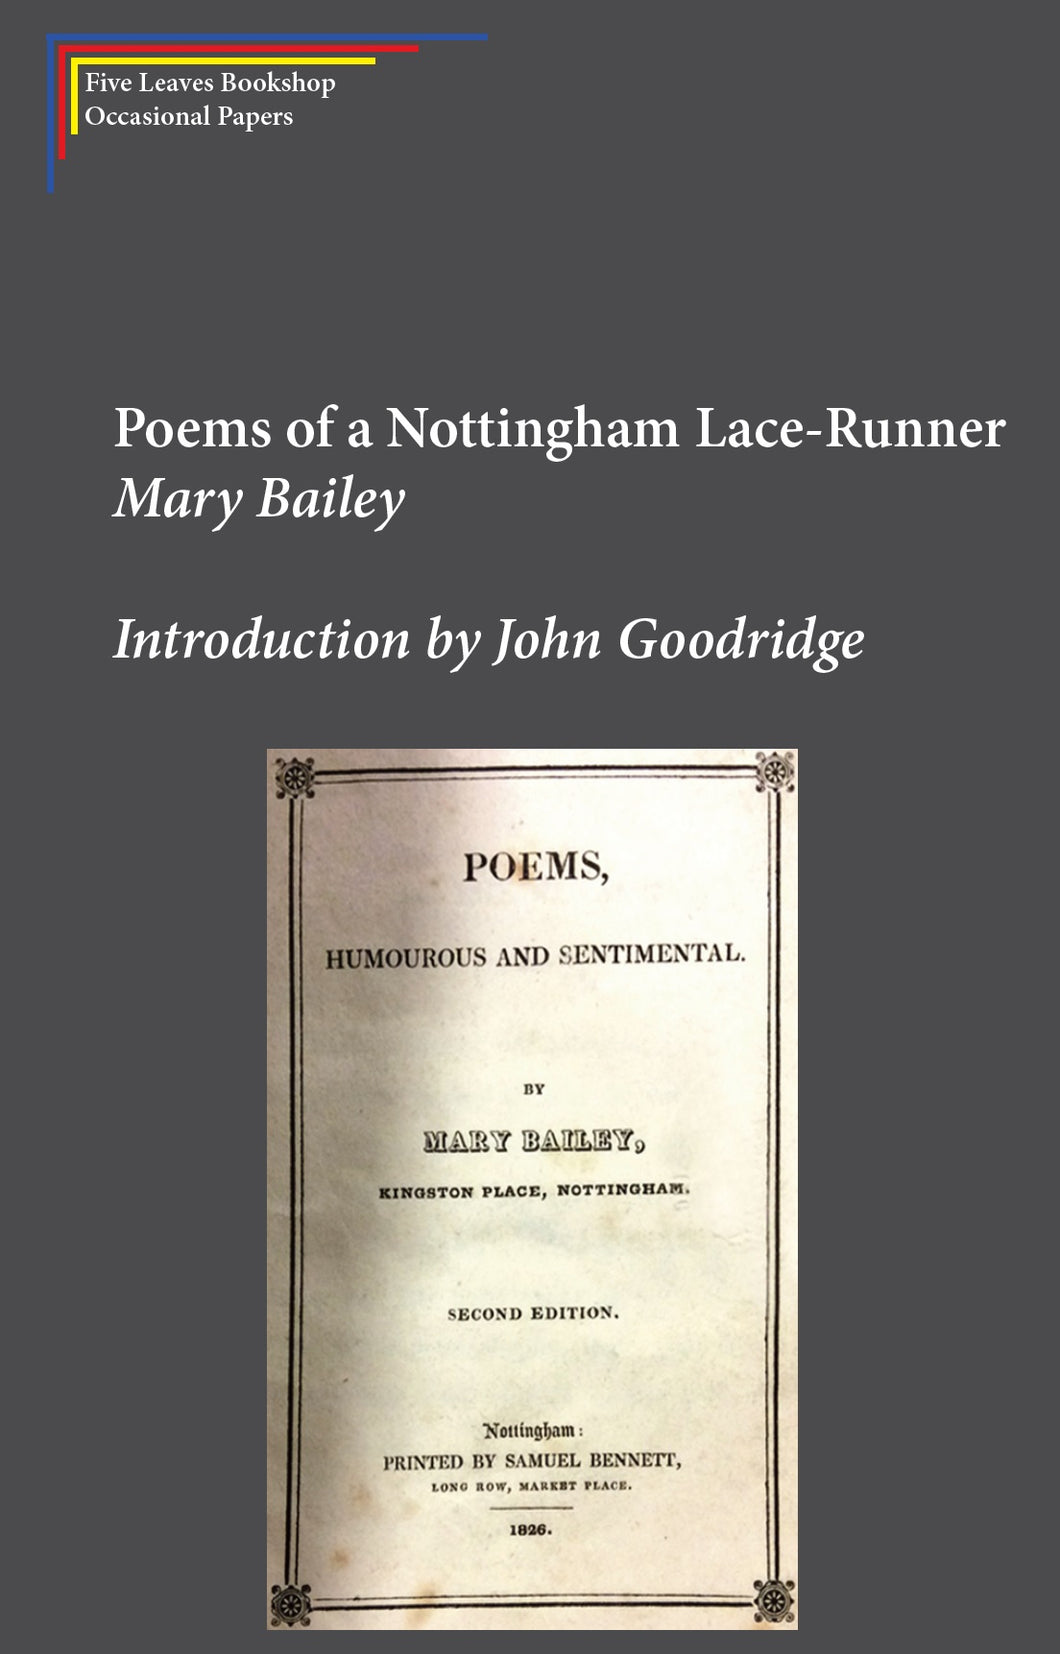 Poems of a Nottingham Lace-Runner